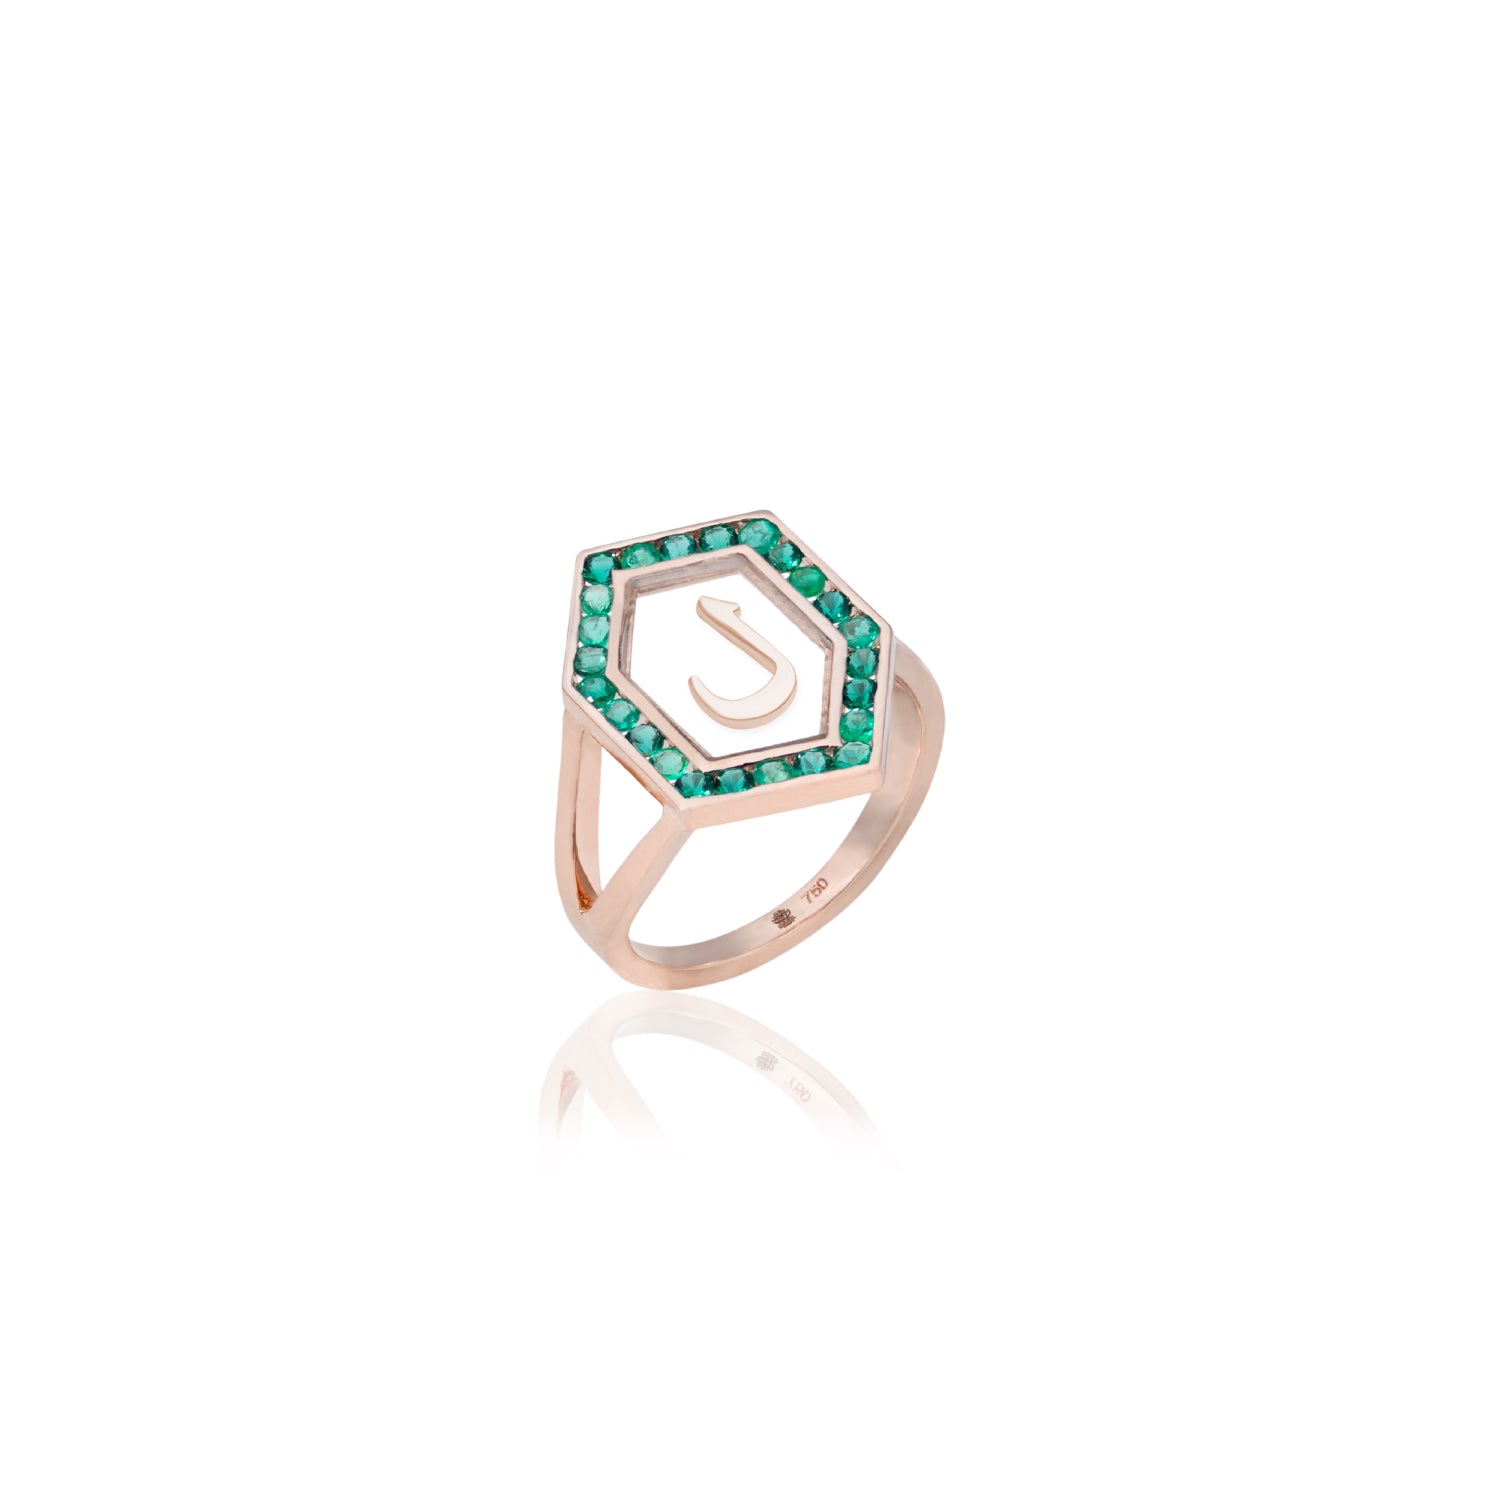 Qamoos 1.0 Letter ل Emerald Ring in Rose Gold